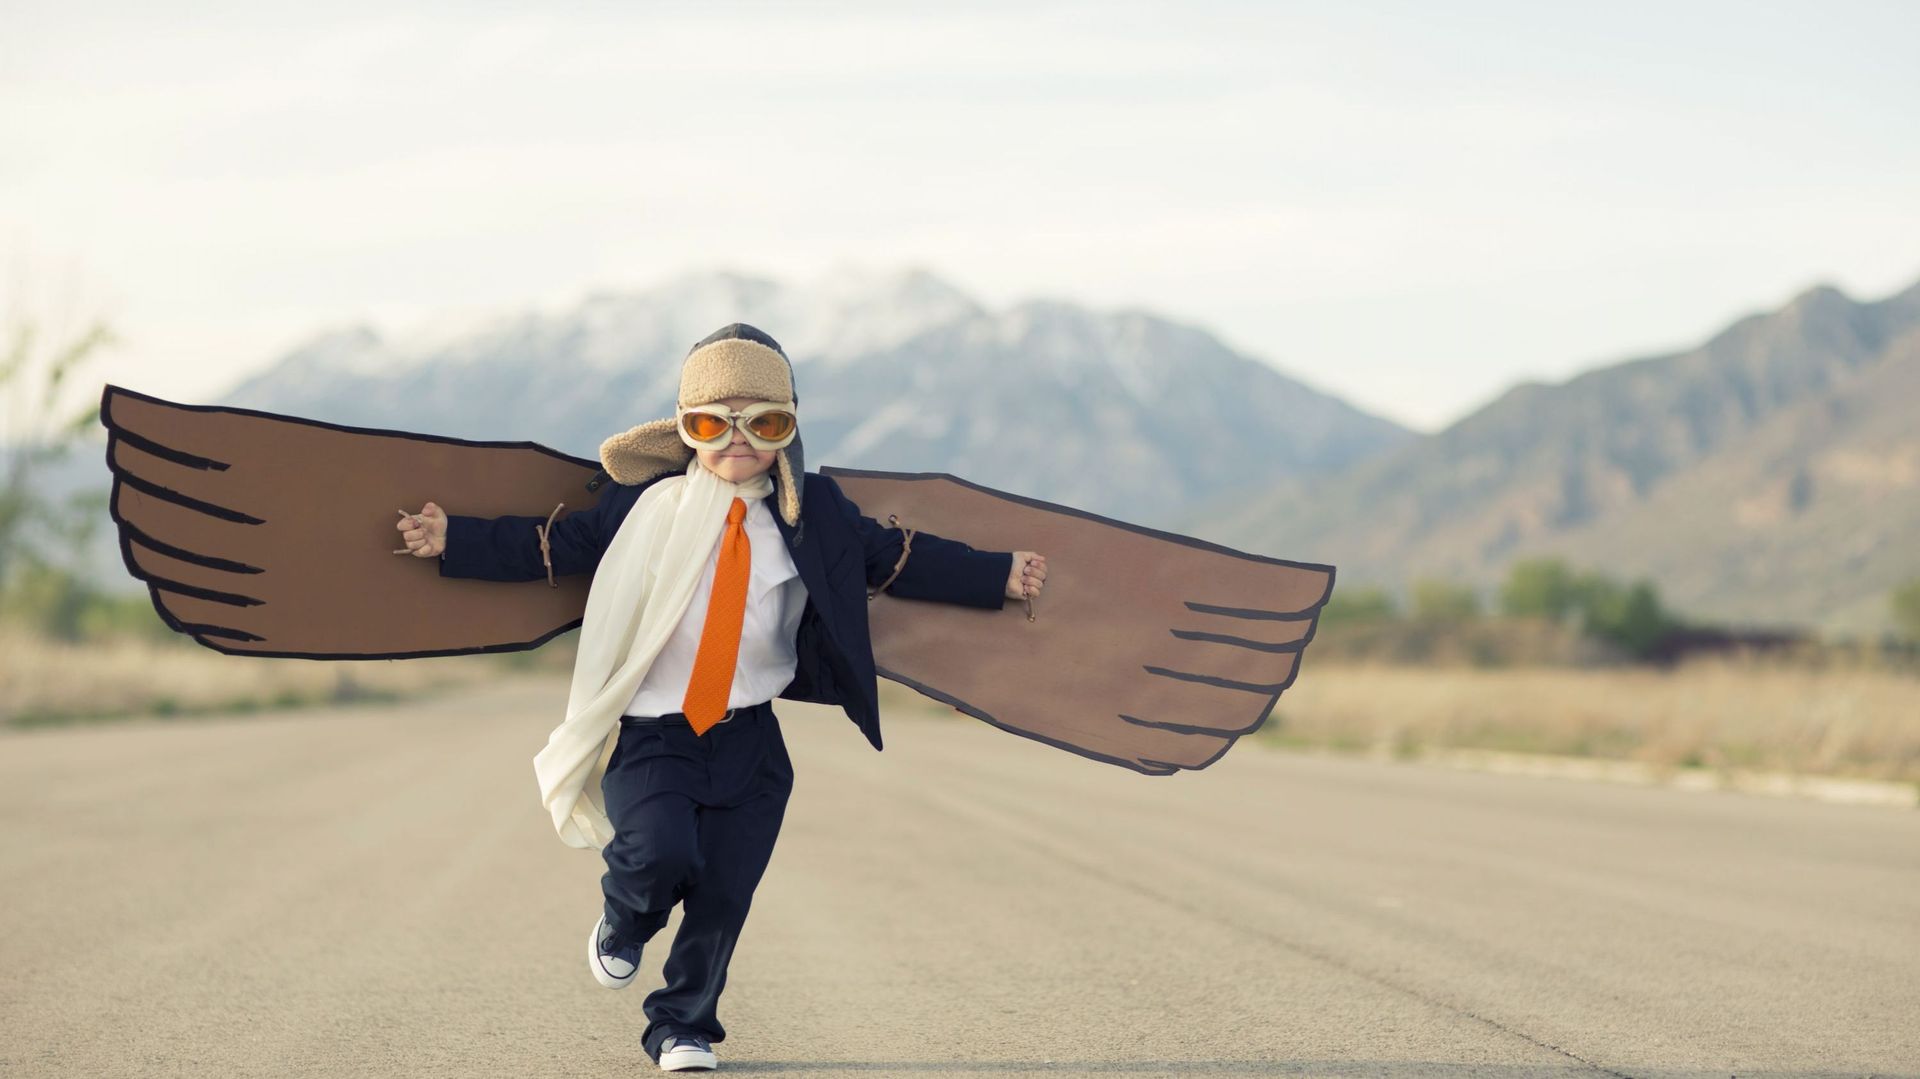 Young Boy Businessman Dressed in Suit with Cardboard Wings